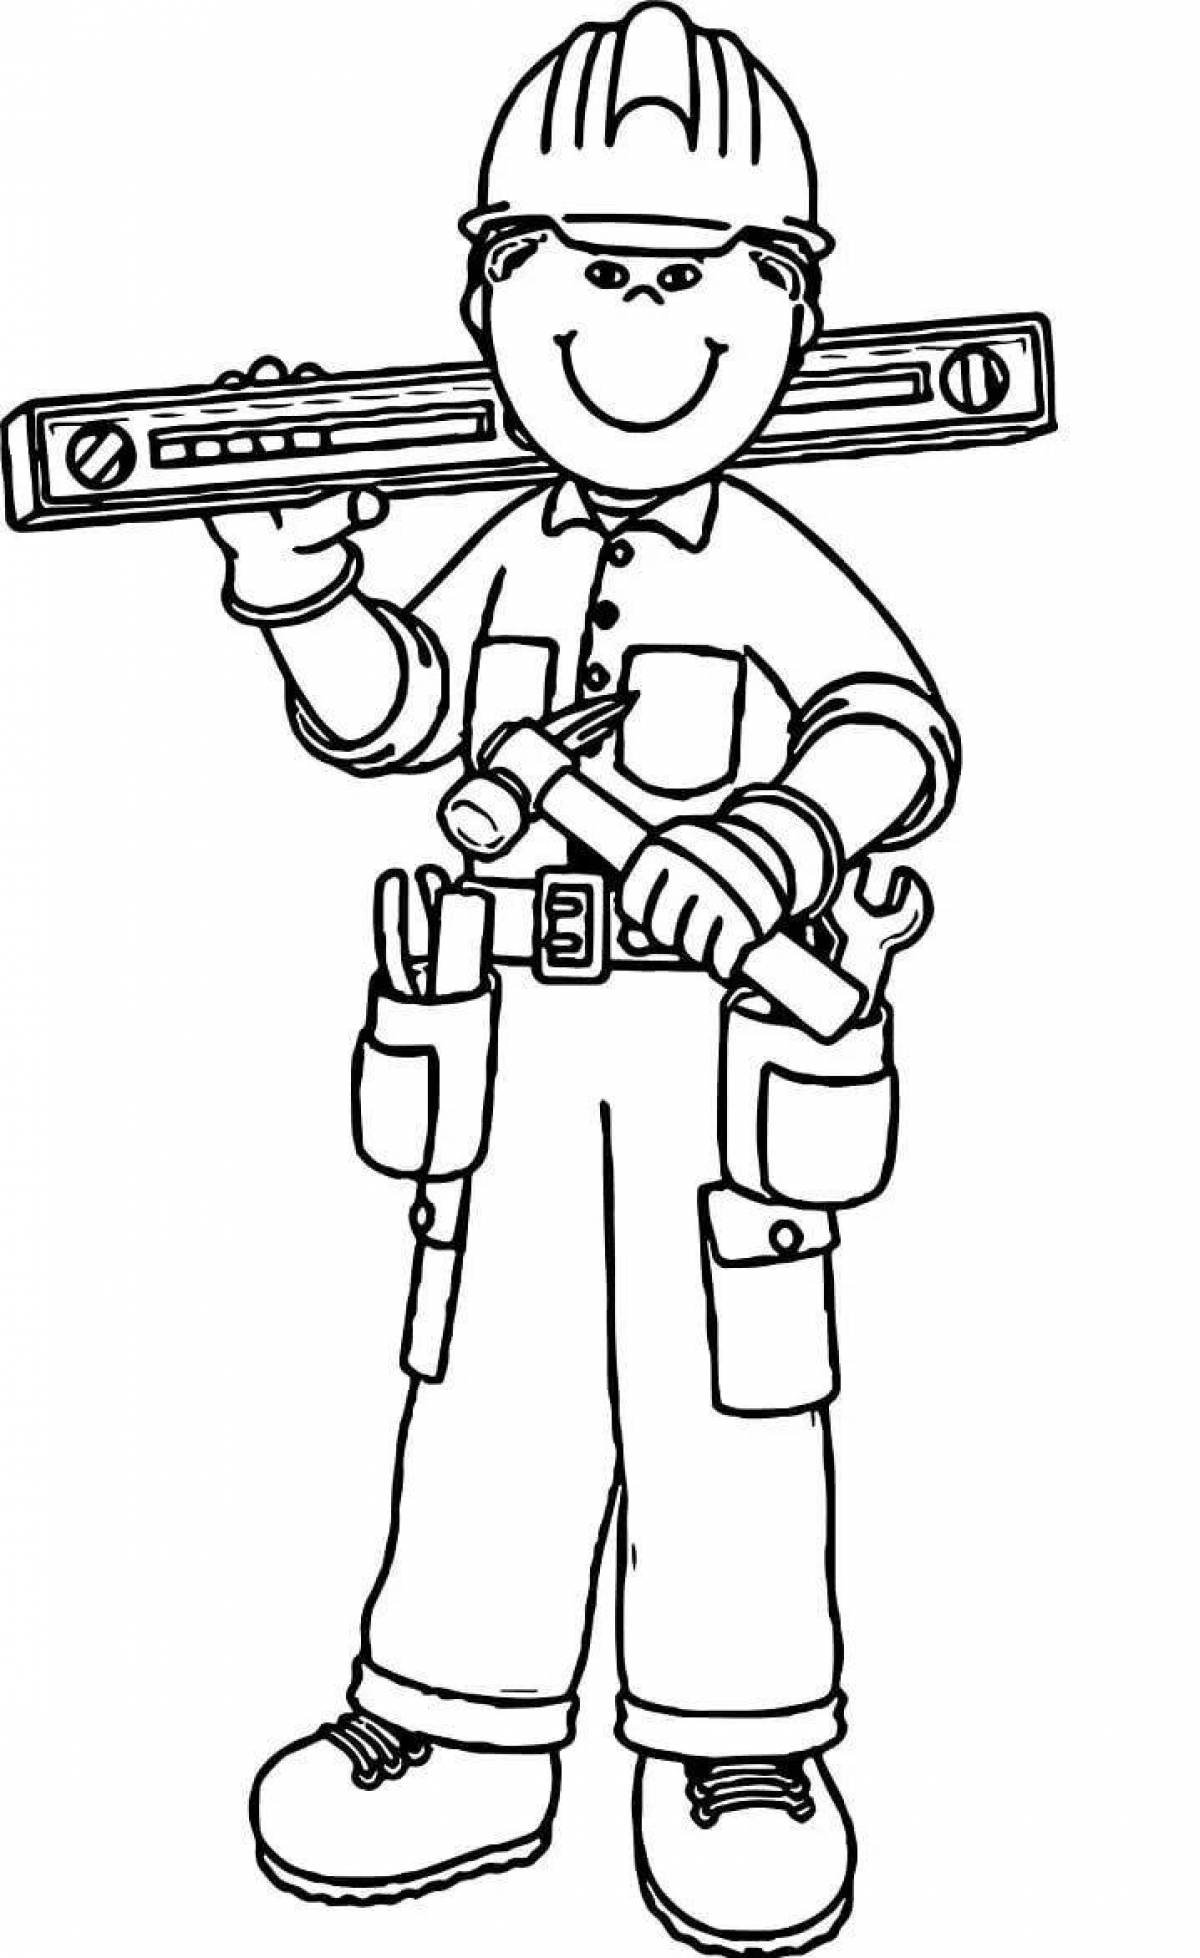 Detailed electrician coloring